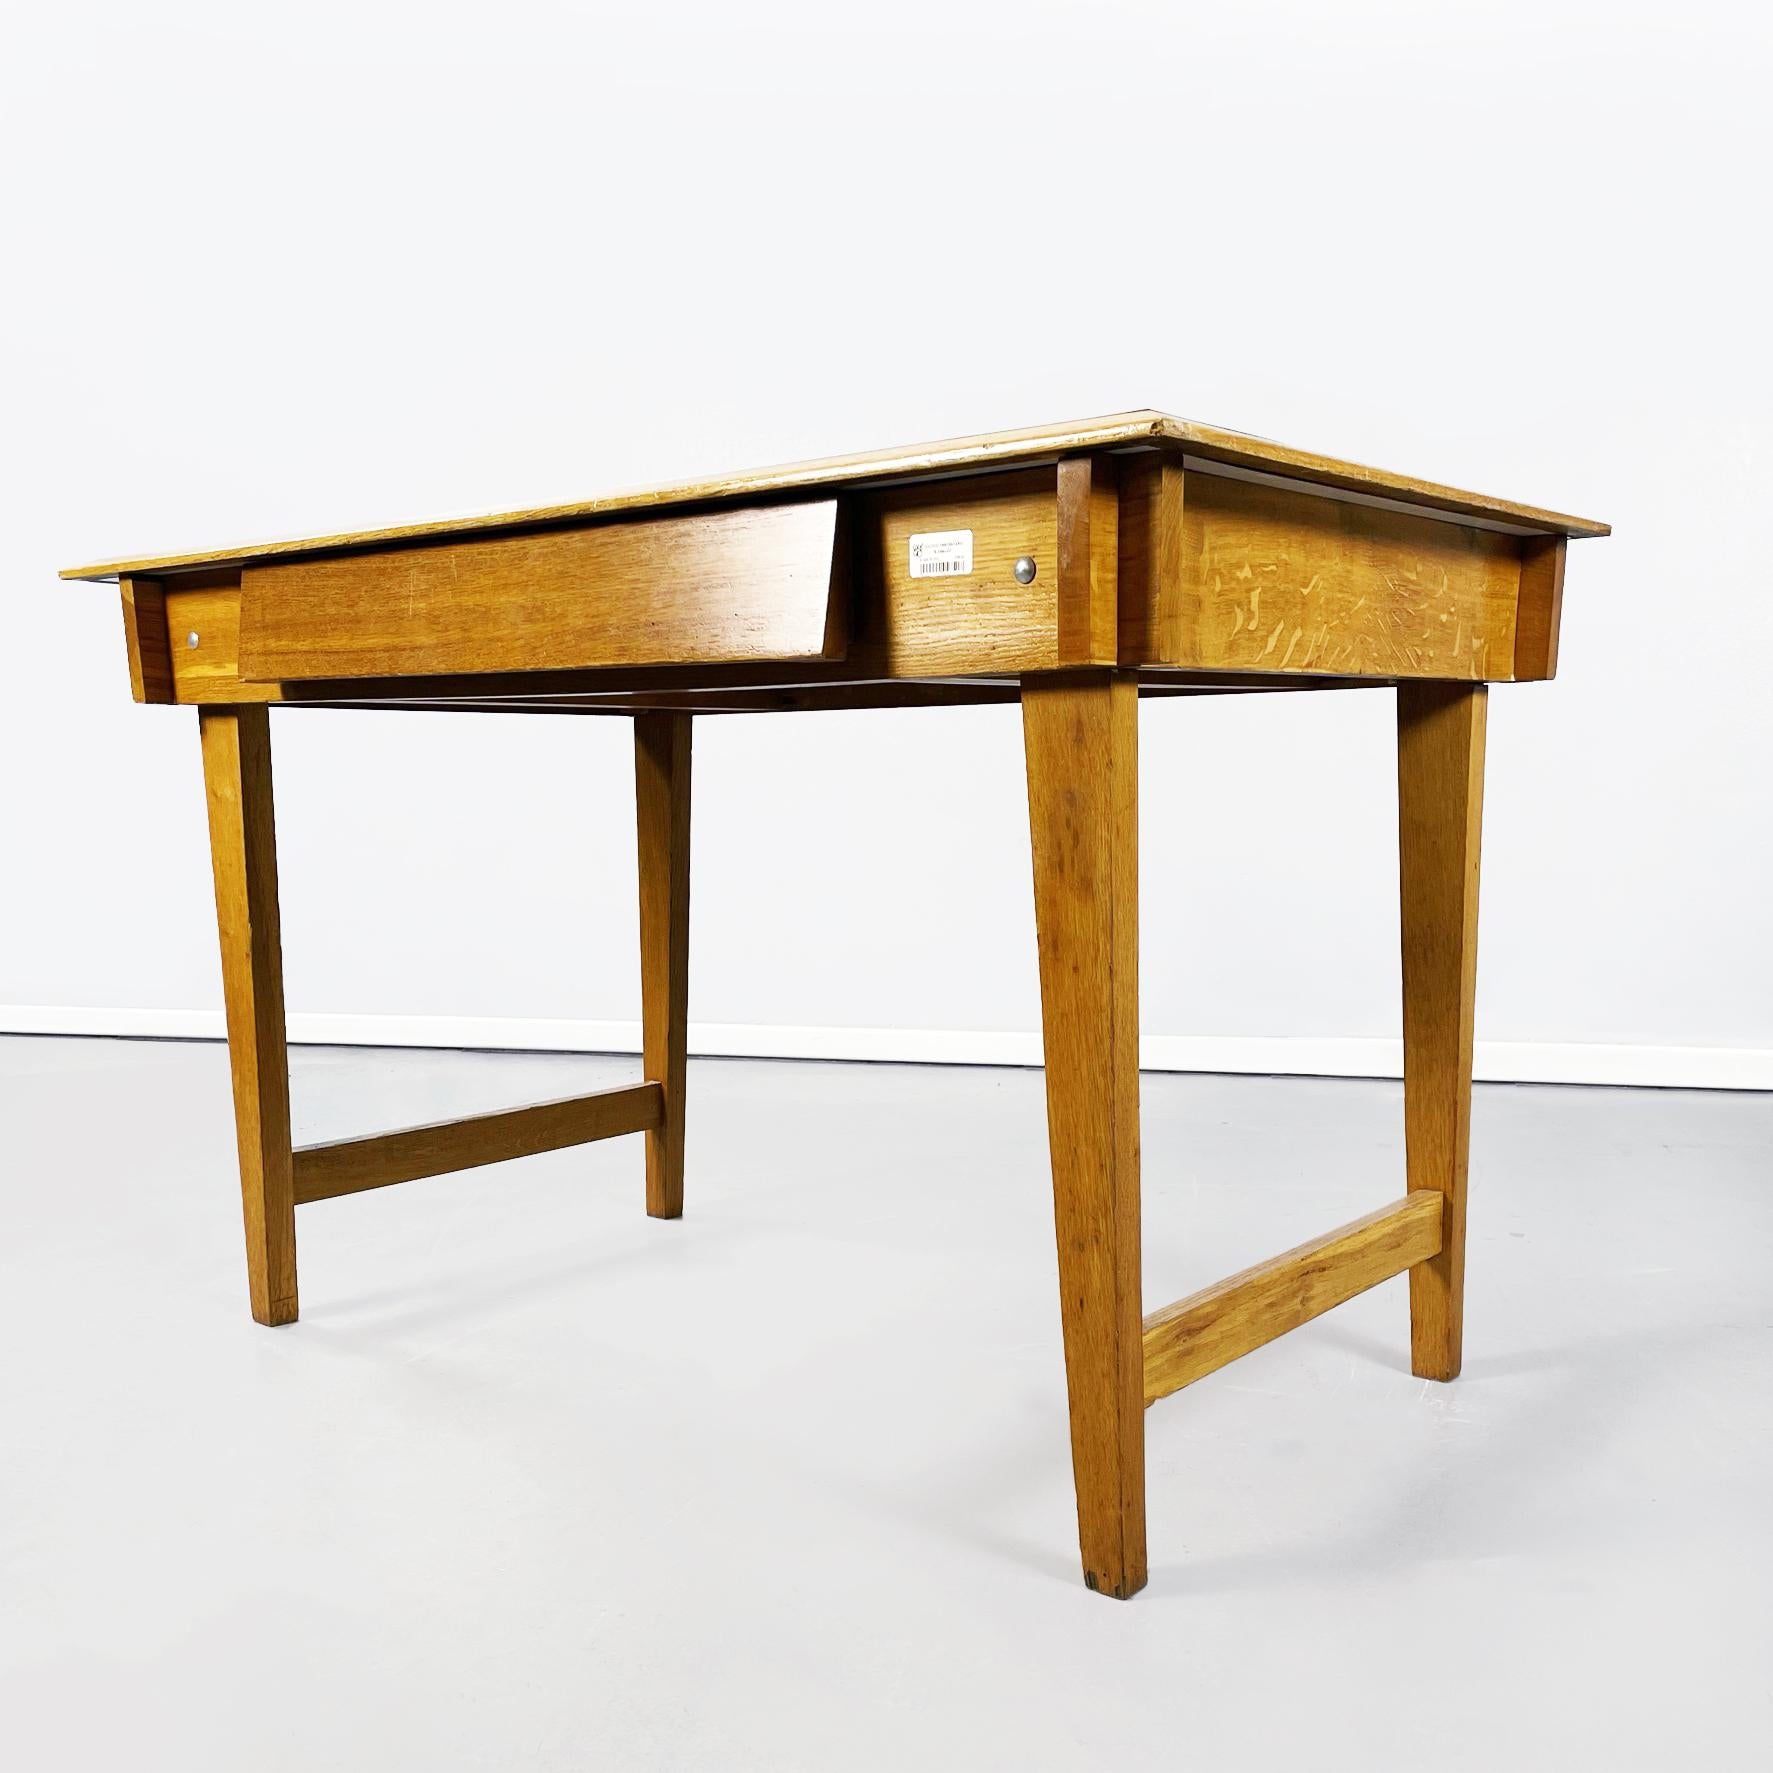 Mid-20th Century Italian Mid-Century Desk in Solid Wood and Light Blue Formica, 1960s